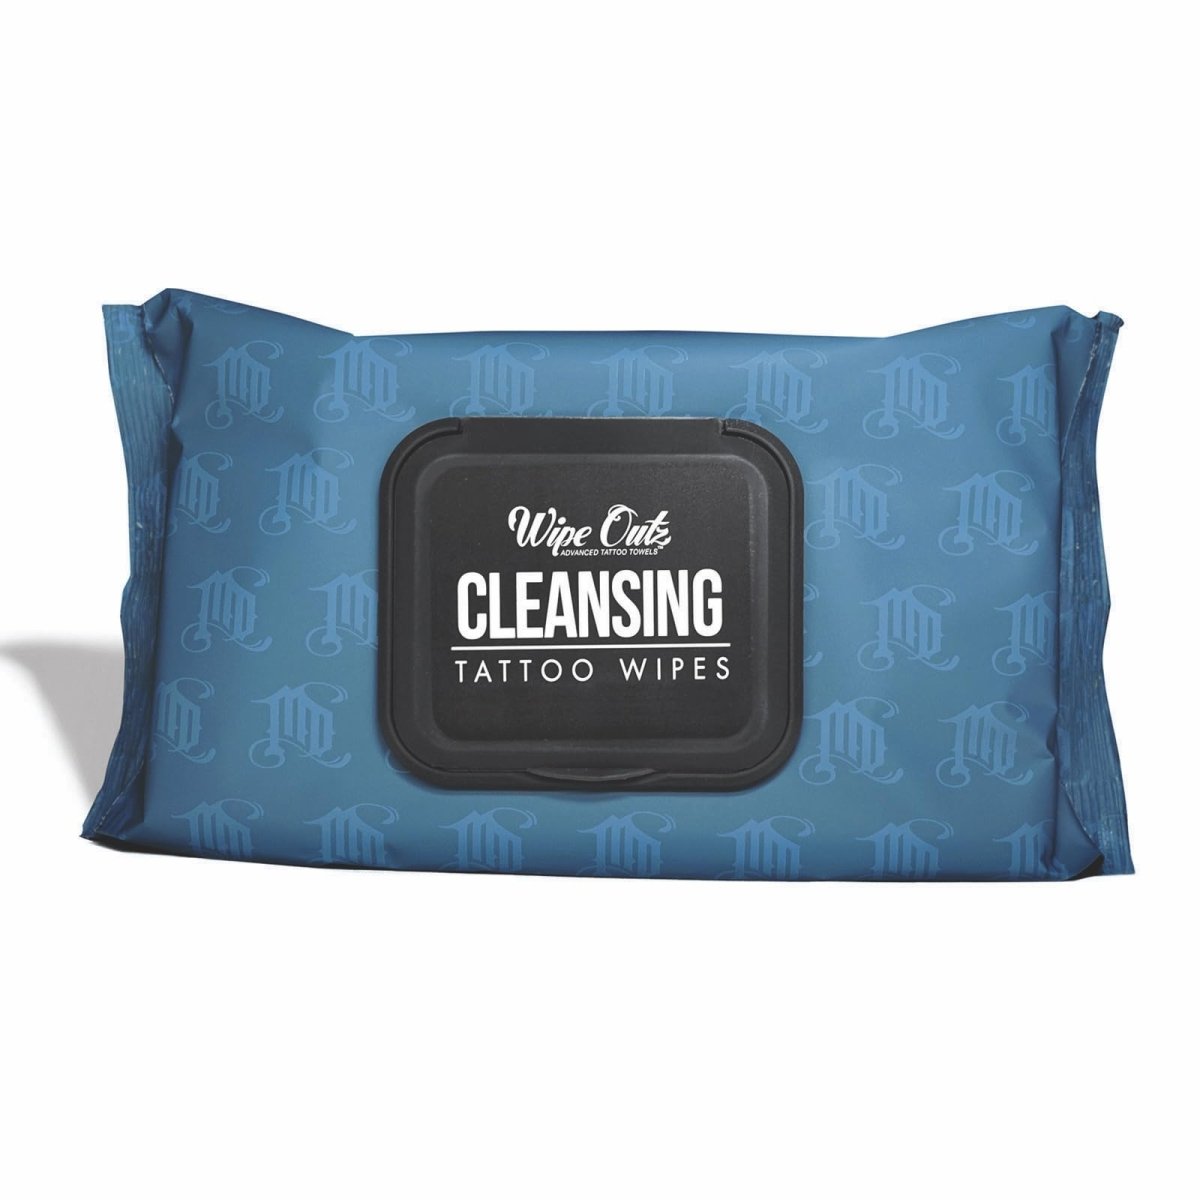 Wipe Outz Tattoo Cleansing Wipes, 40-Count, Alcohol-Free